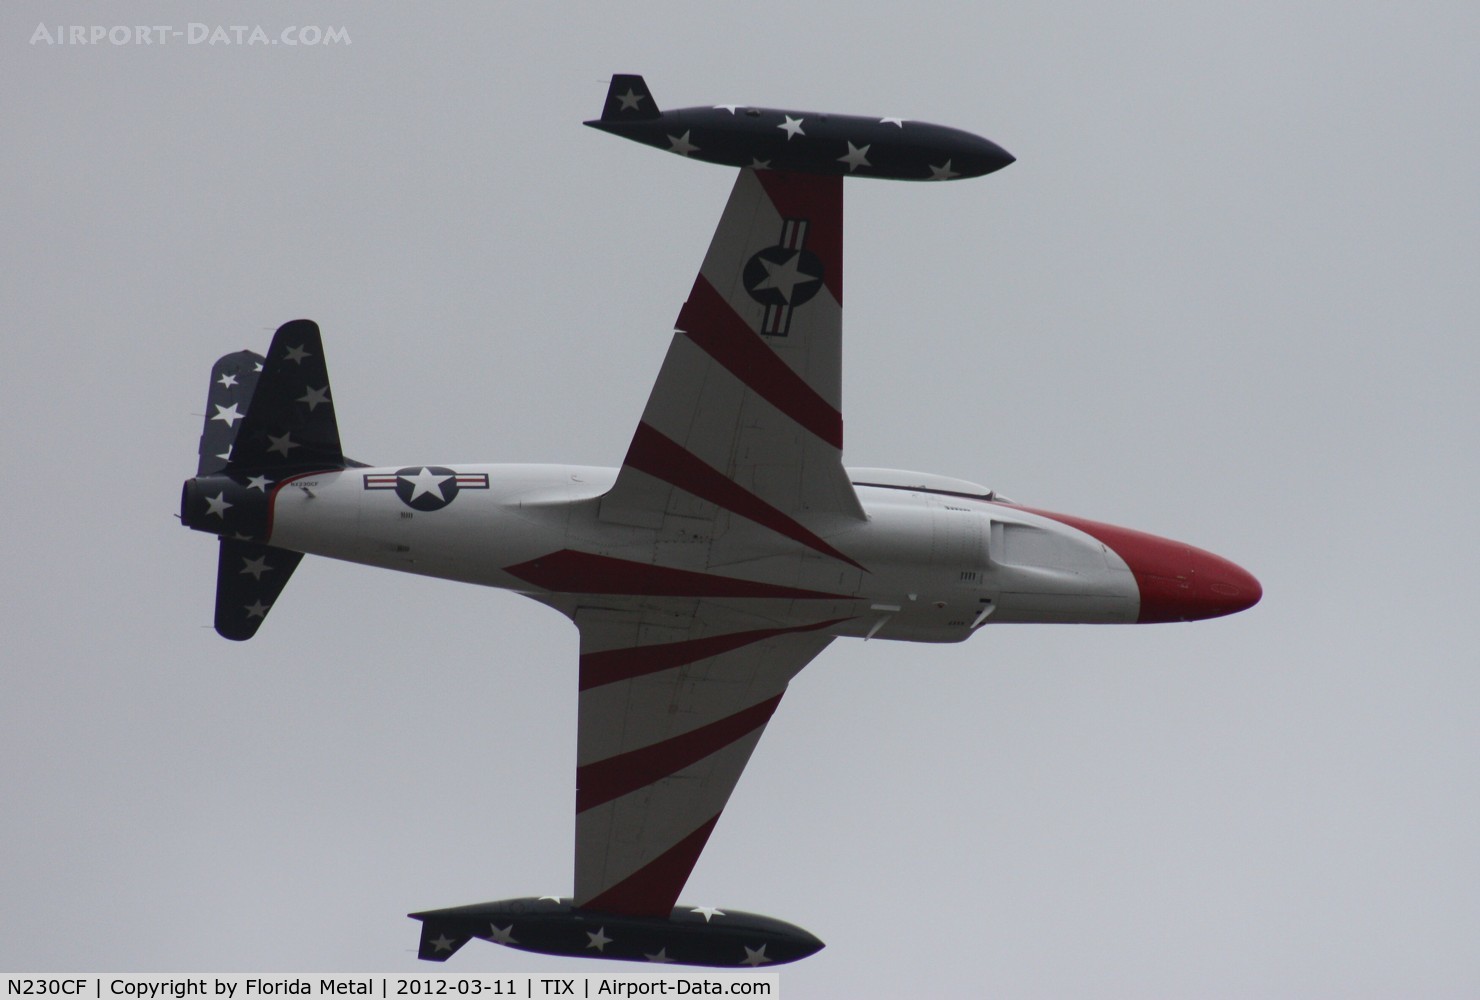 N230CF, 1953 Canadair CT-133 Silver Star 3 C/N T33-24, T-33 in a different paint job each year it is here